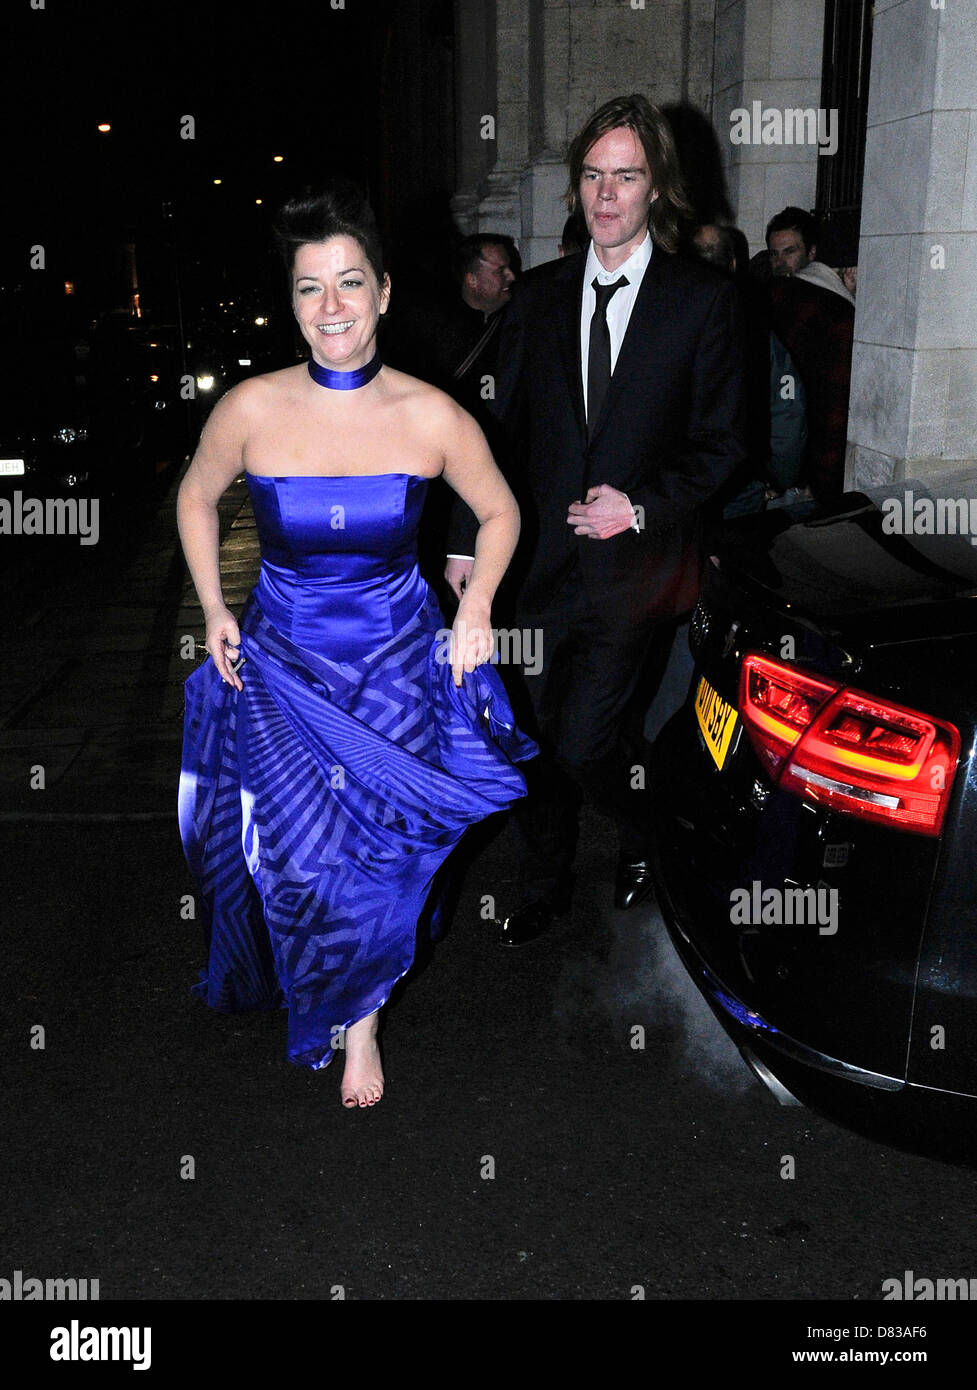 Rory Kinnear and Lynne Ramsay, Orange British Academy Film Awards (BAFTAs) afterparty held at The Grosvenor House Hotel - Stock Photo